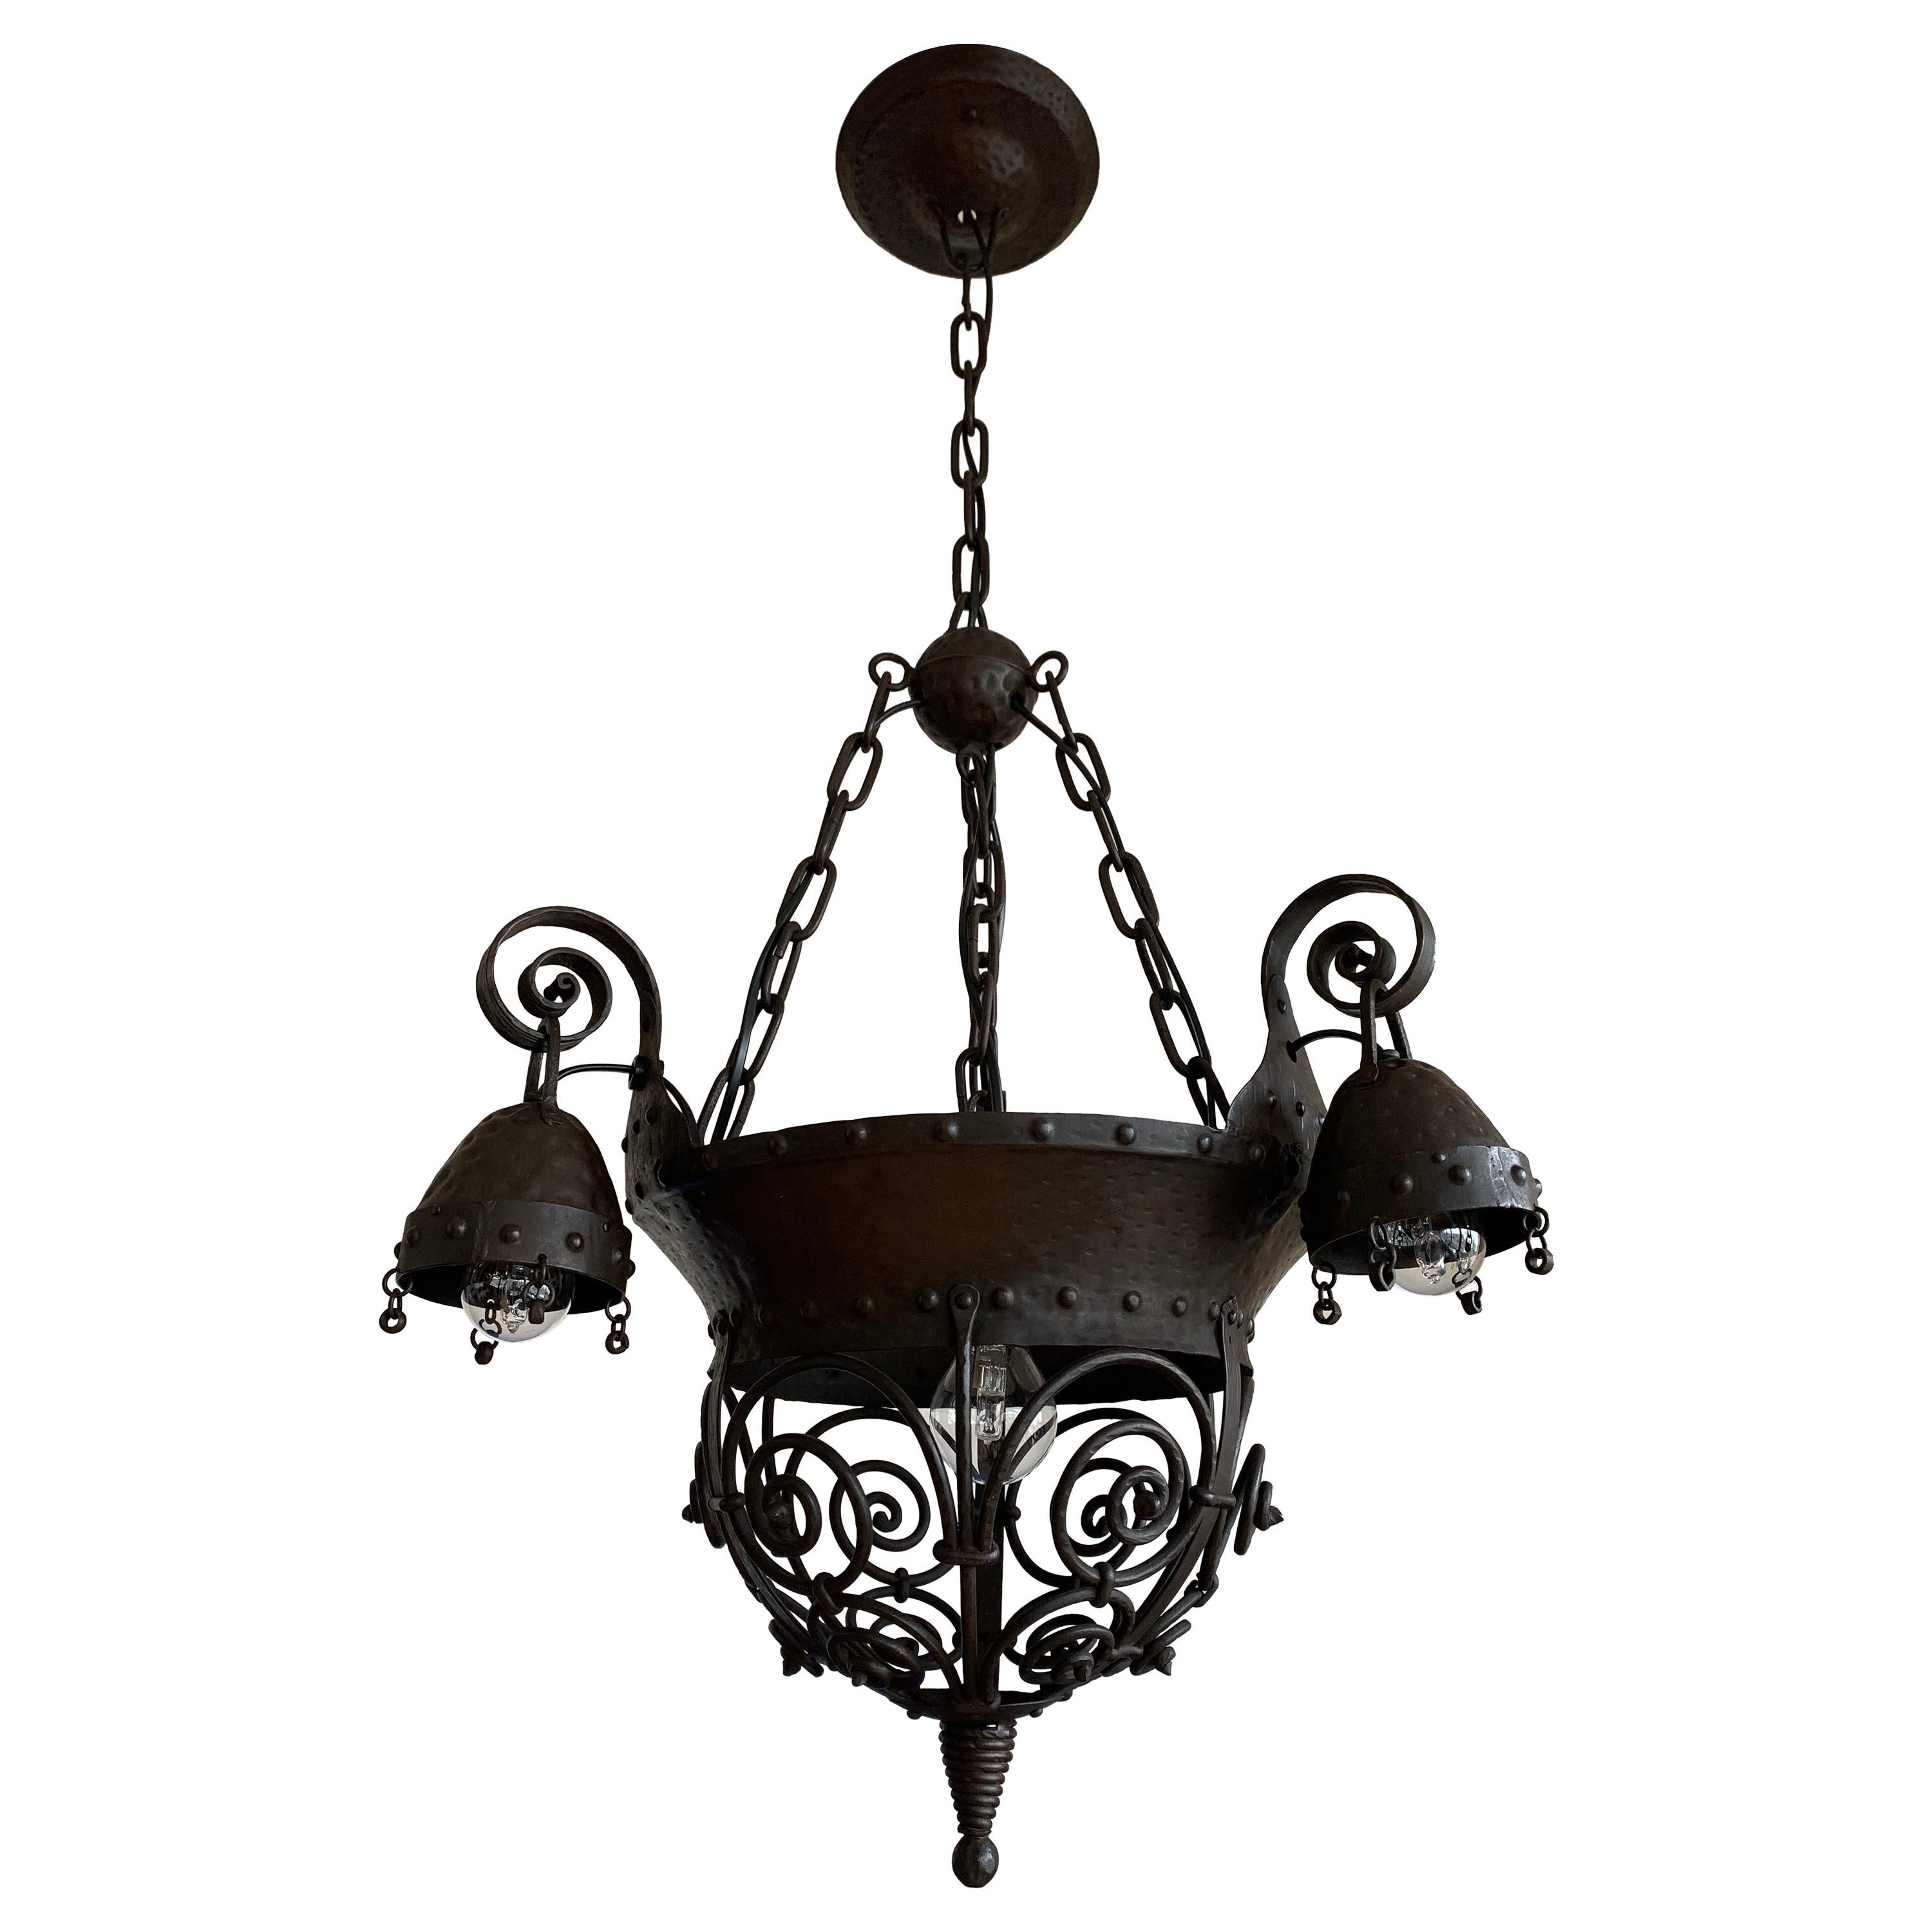 Unique Arts and Crafts Crafted Wrought Iron Chandelier / 4 Light Pendant, 1890s